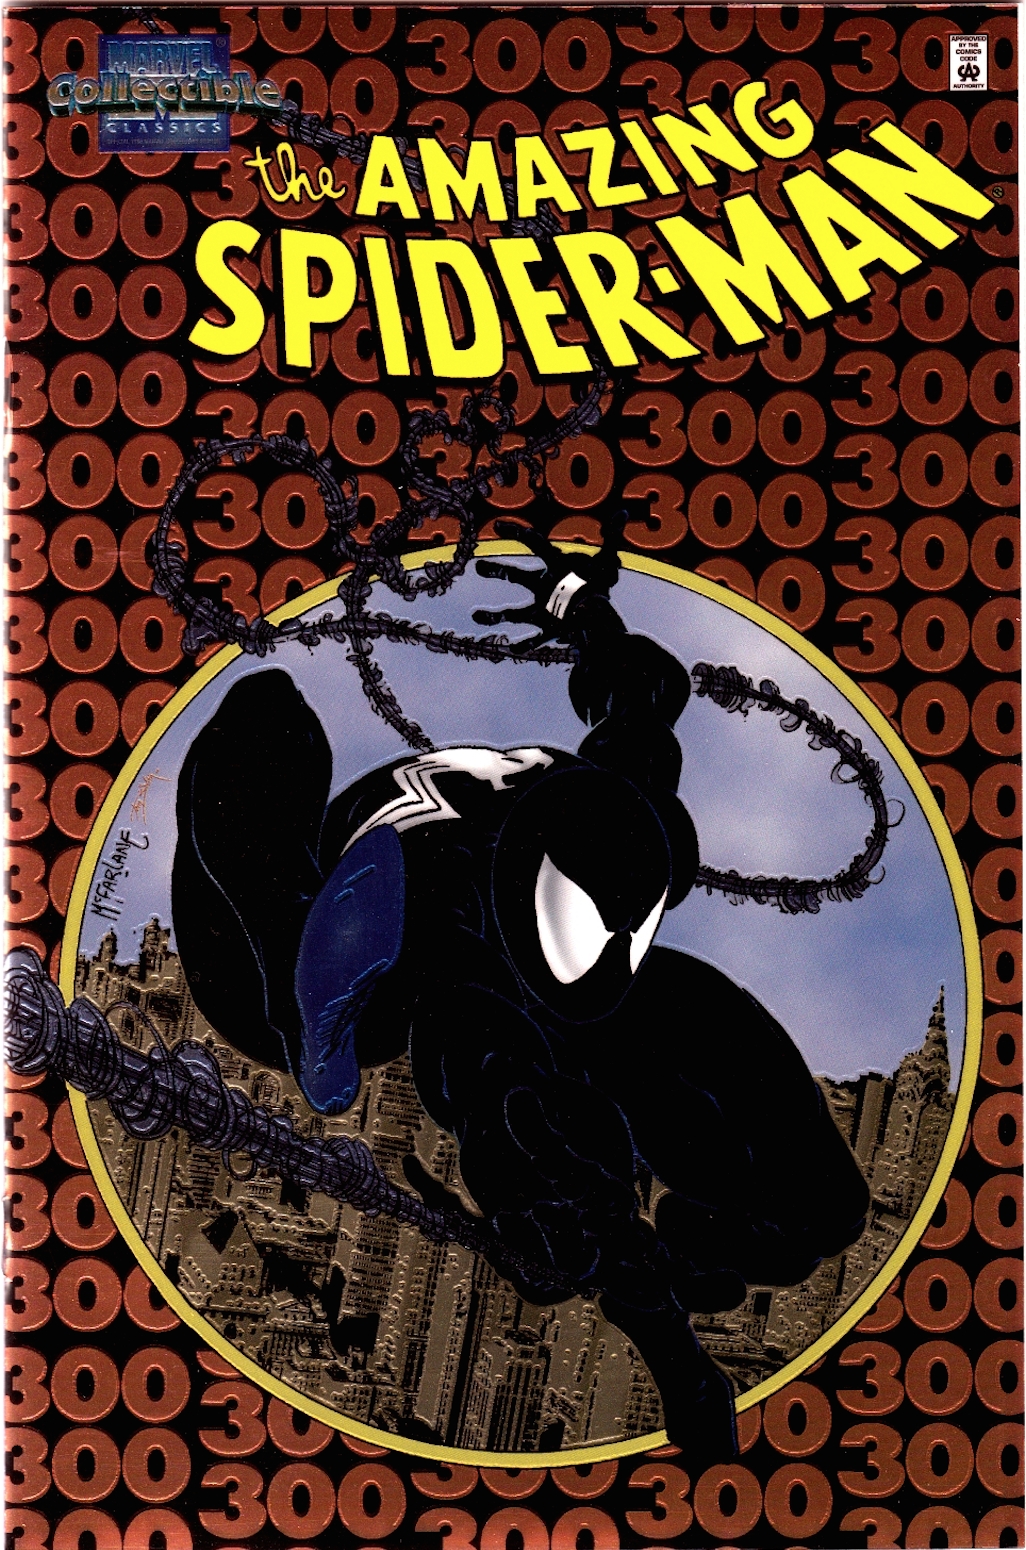 Amazing Spider-Man #300 cover (1st full appearance of Venom), in 